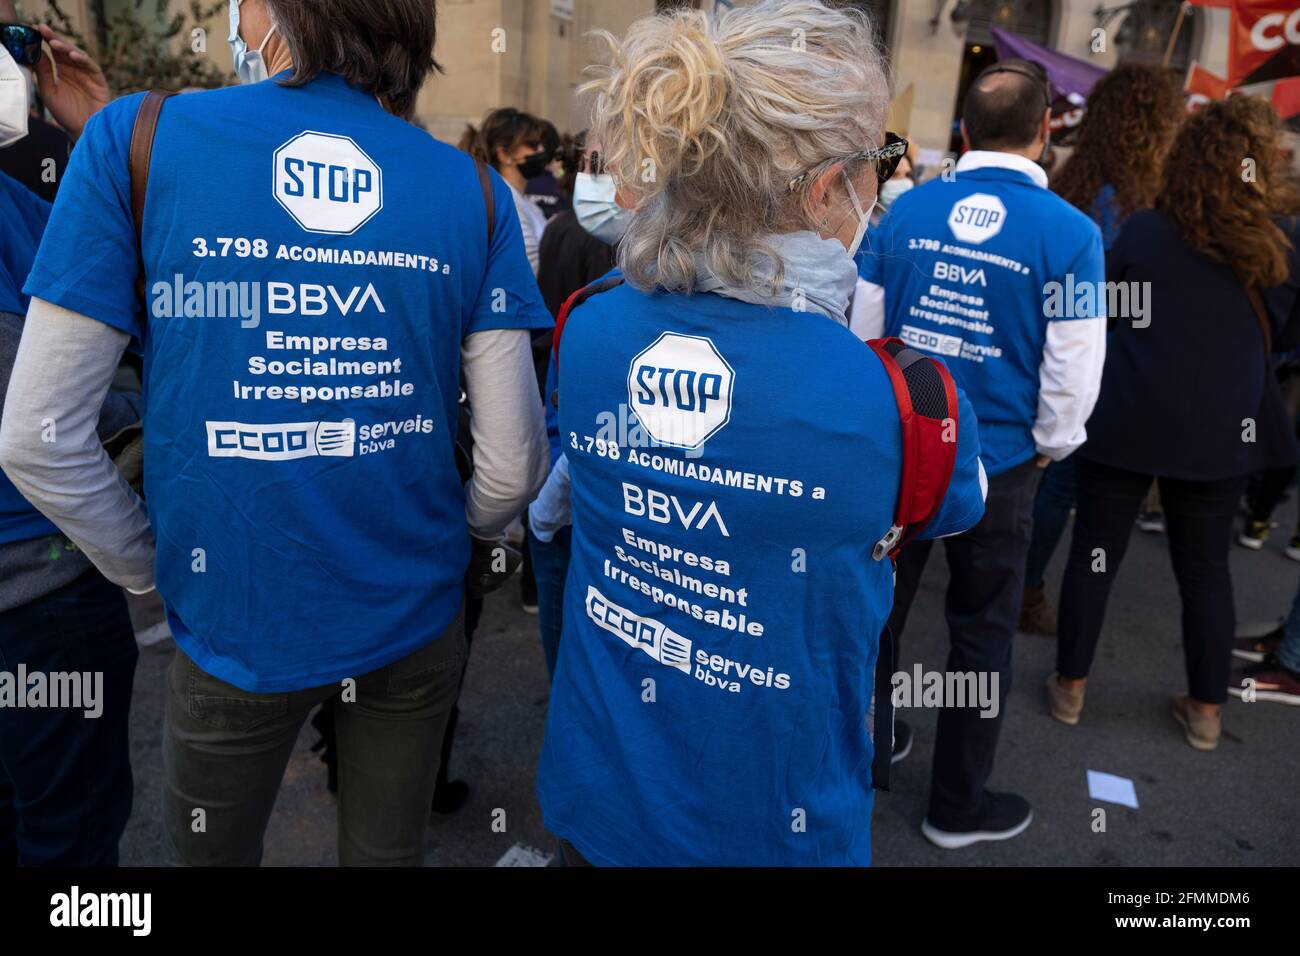 Barcelona, Spain. 10th May, 2021. Protesters seen wearing blue shirts labeled against the 3,798 layoffs during the demonstration.Summoned by the banking unions, hundreds of Banco Bilbao Vizcaya Argentaria (BBVA) bank workers have gathered in front of the headquarters in Vía Laietana to protest the Employment Regulation File (ERE) that the entity wants to apply with the dismissal of more than 3,000 workers. (Photo by Paco Freire/SOPA Images/Sipa USA) Credit: Sipa USA/Alamy Live News Stock Photo